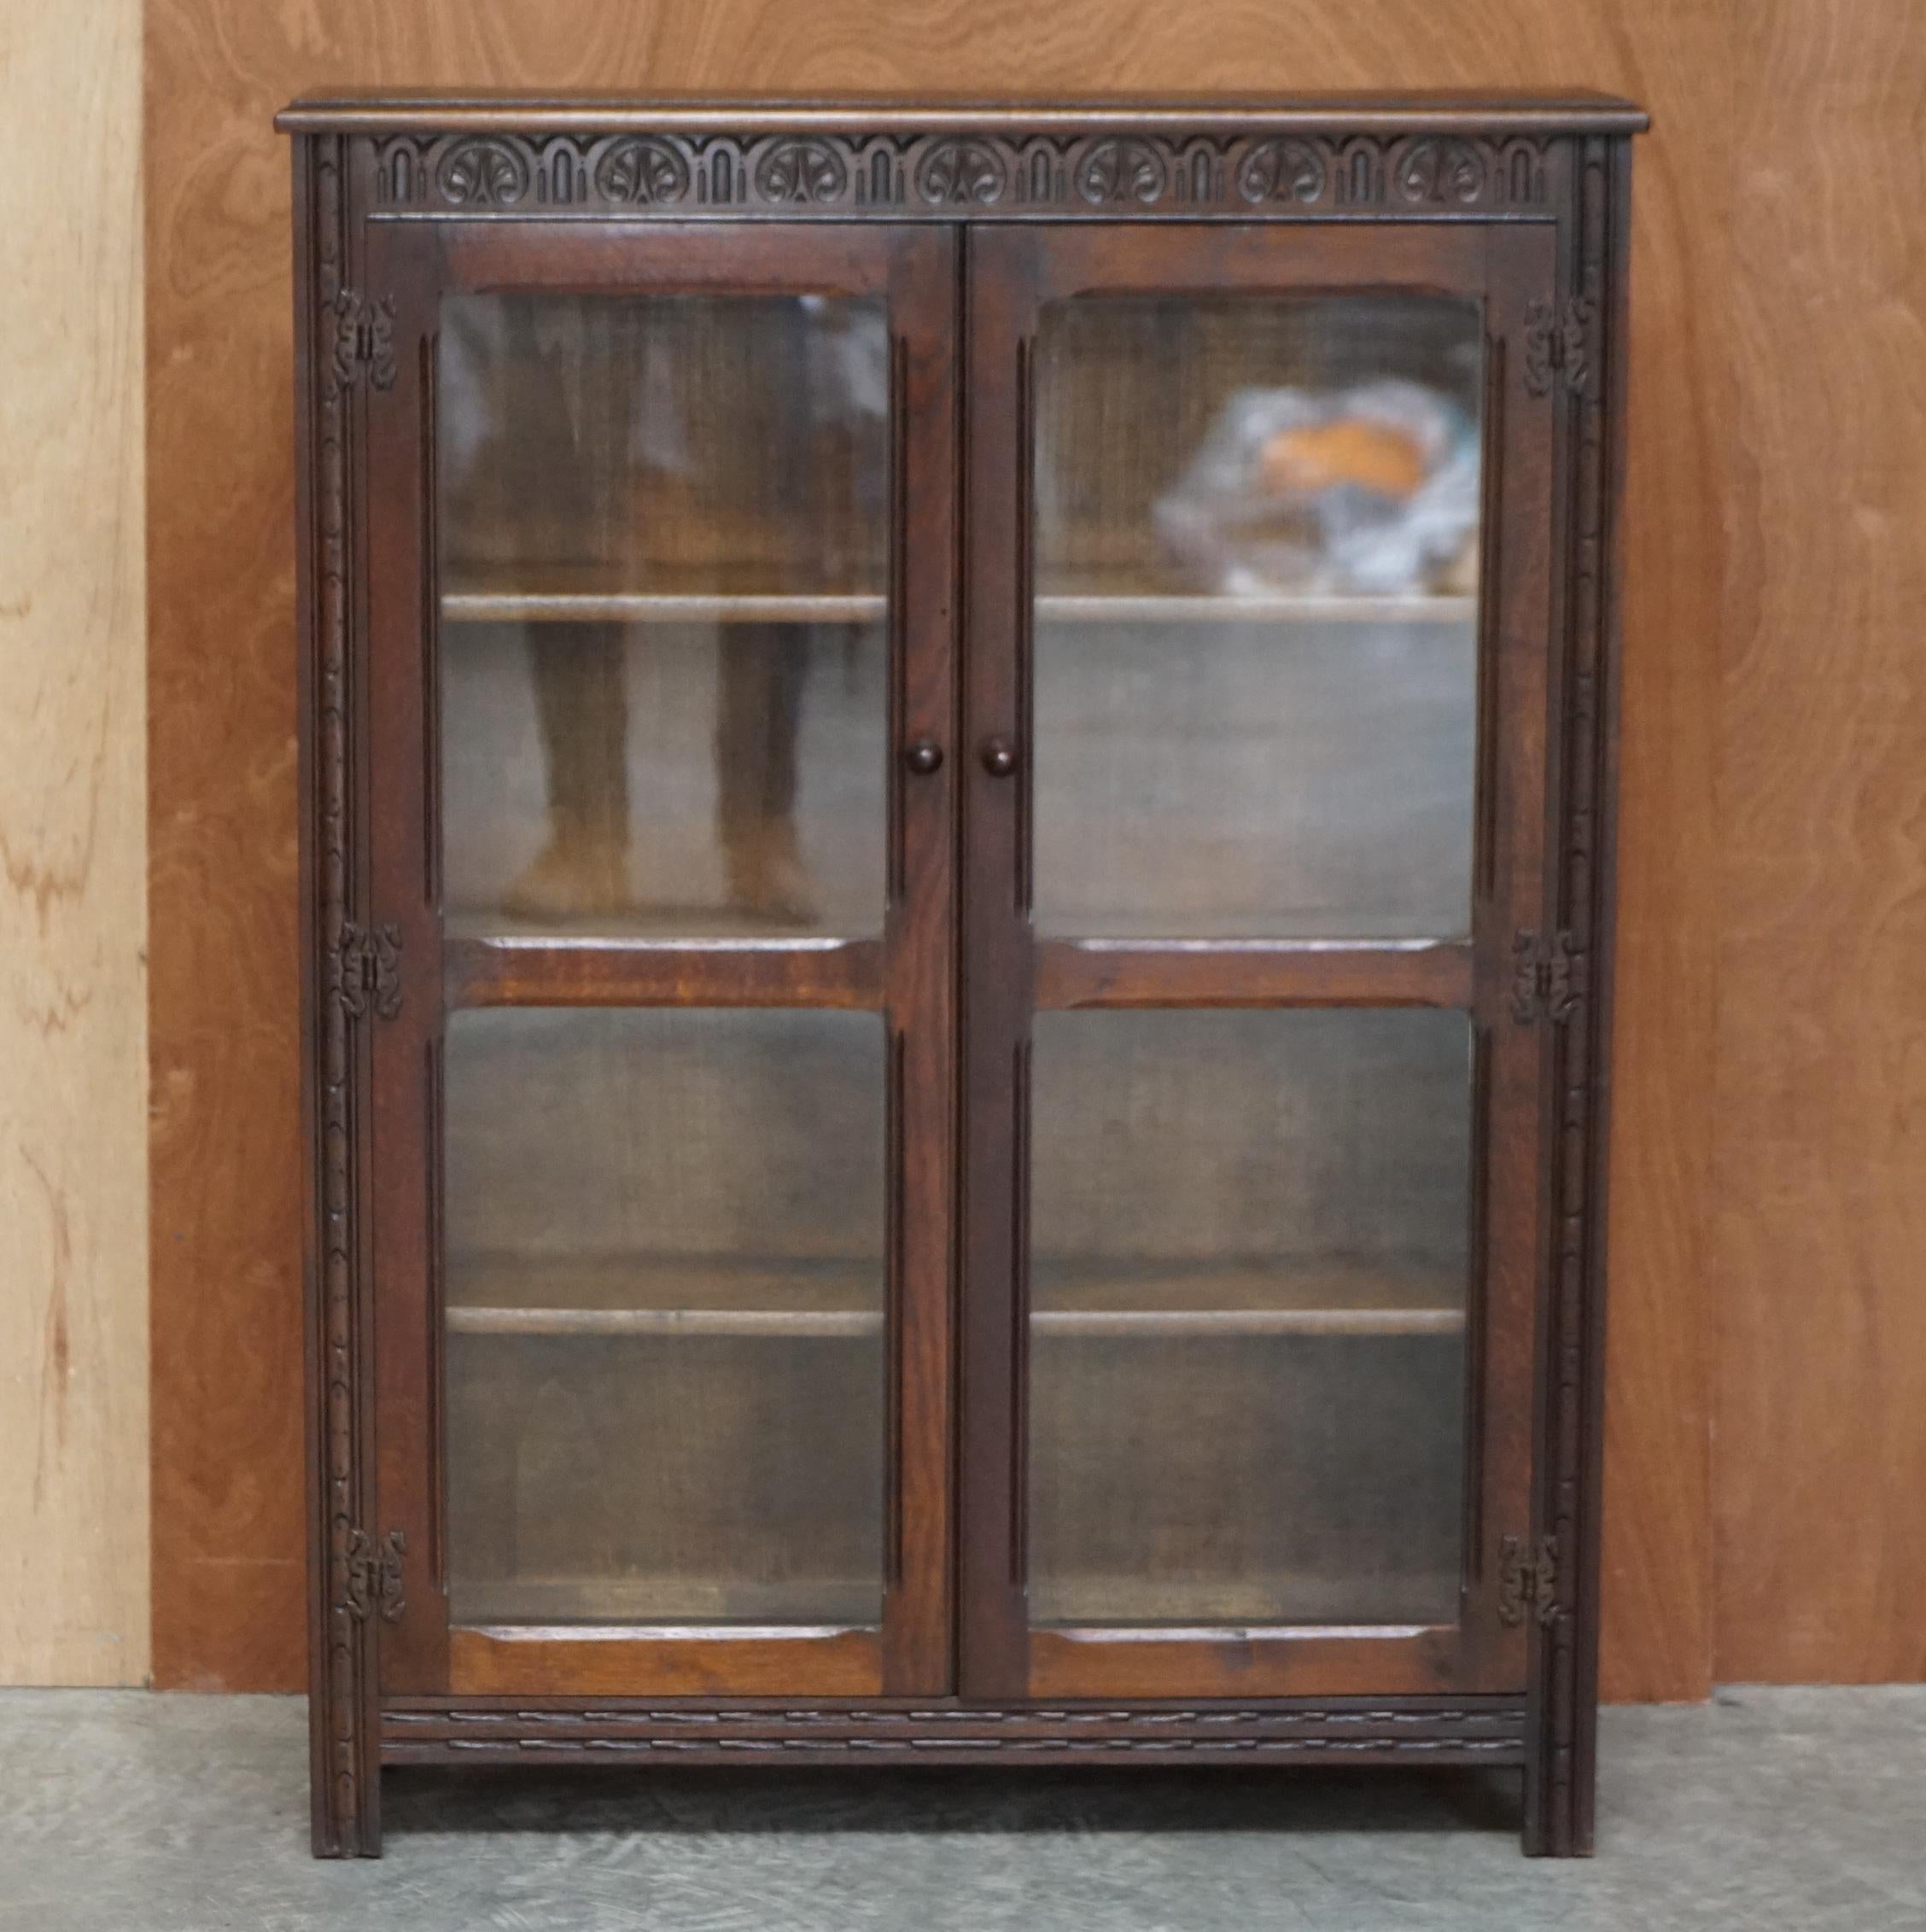 We are delighted to offer this nicely made circa 1940’s Jacobean revival English oak glazed door bookcase

A good looking and well made piece, the style is Jacobean as mentioned, this is a mid century example with nicely detailed hinges and